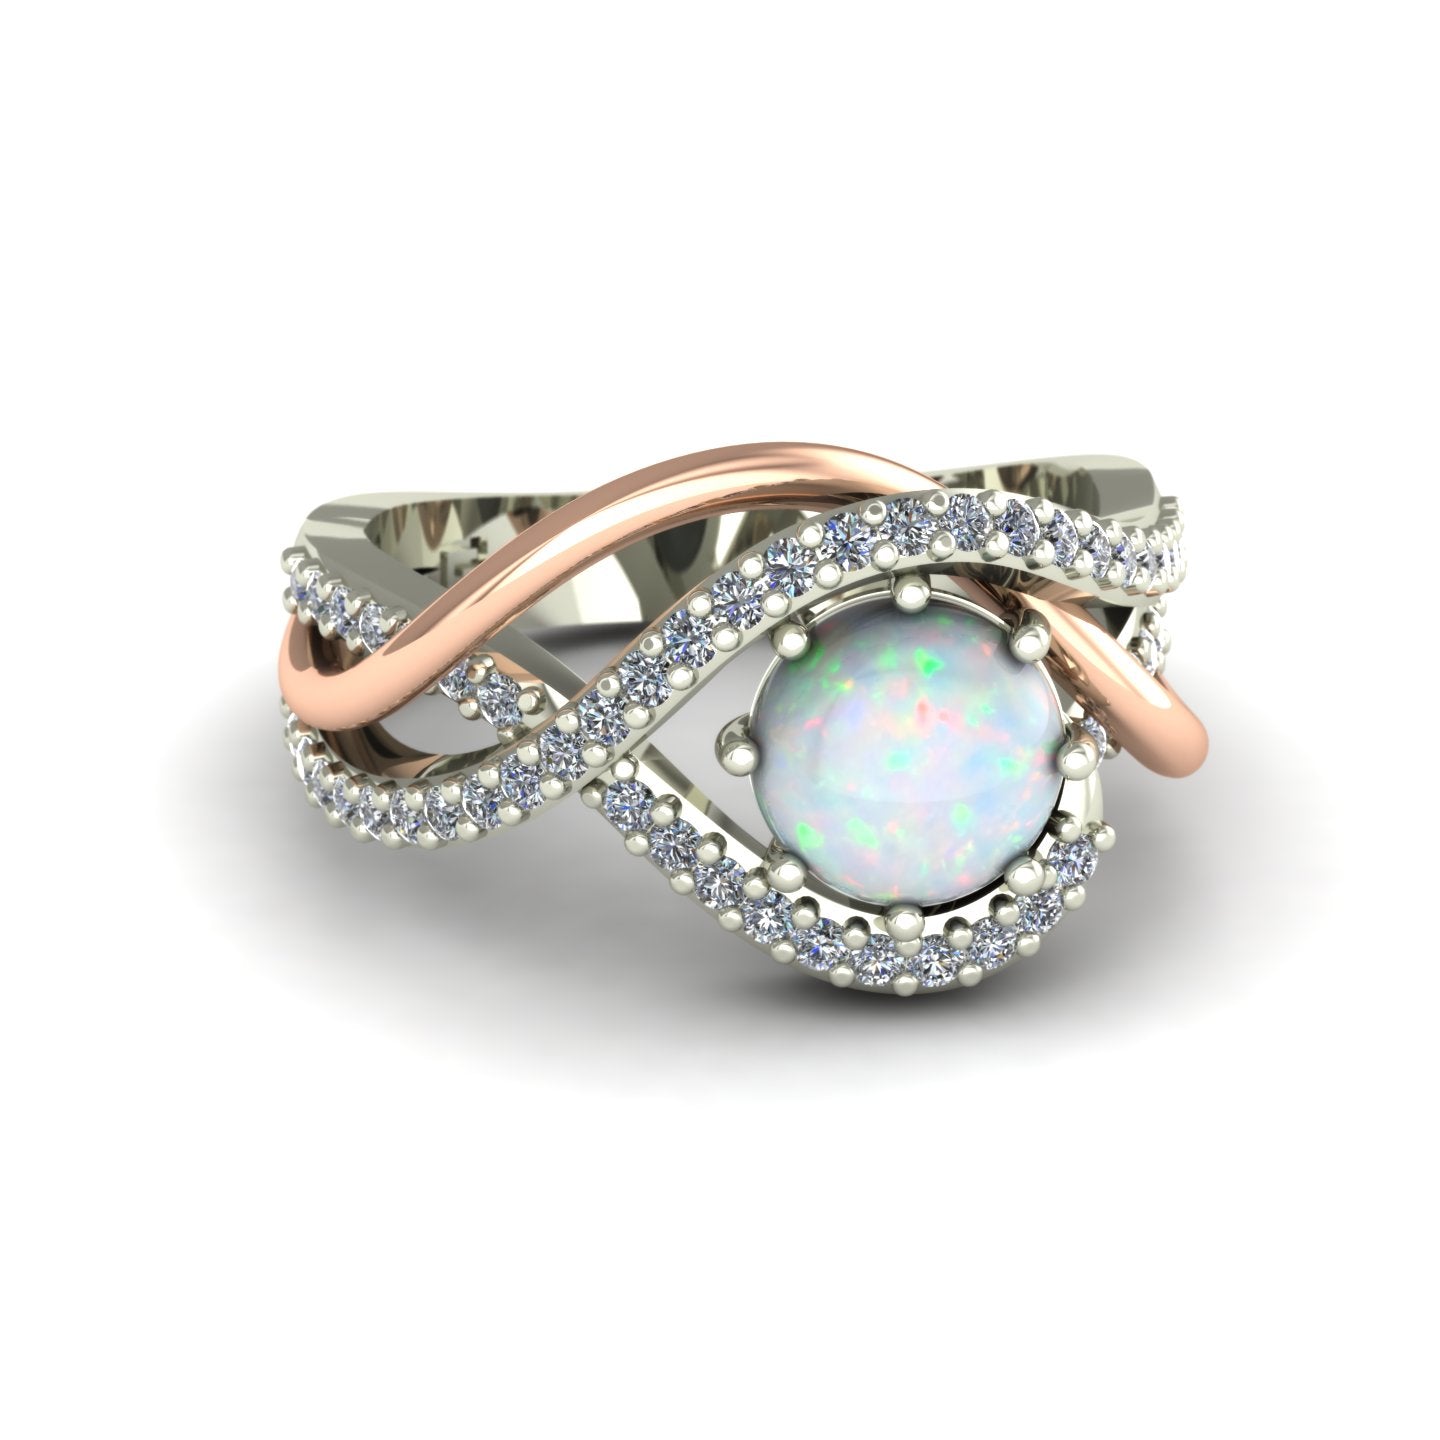 opal and diamond two tone abstract ring in 14k rose and white gold - Charles Babb Designs - top view